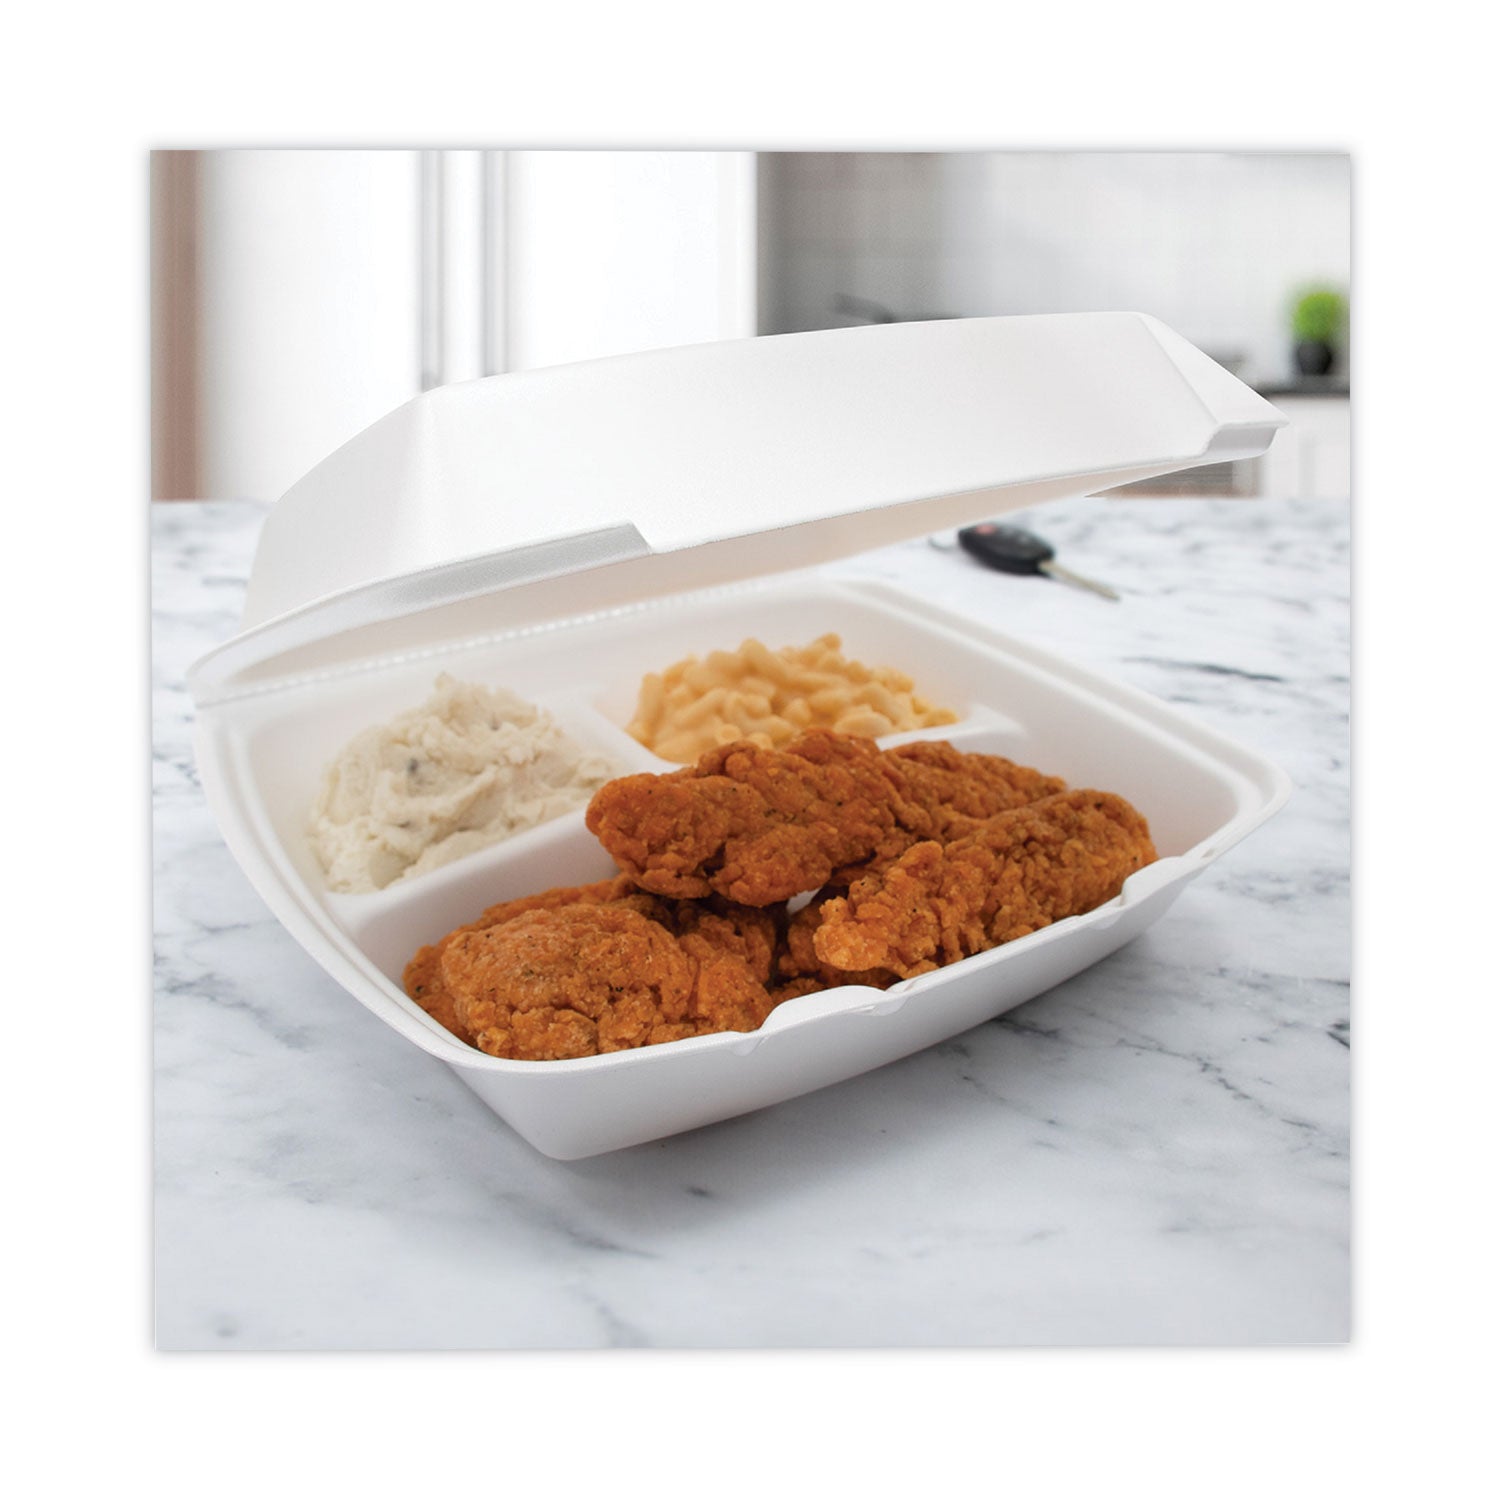 Insulated Foam Hinged Lid Containers, 3-Compartment. 7.9 x 8.4 x 3.3, White, 200/Carton - 